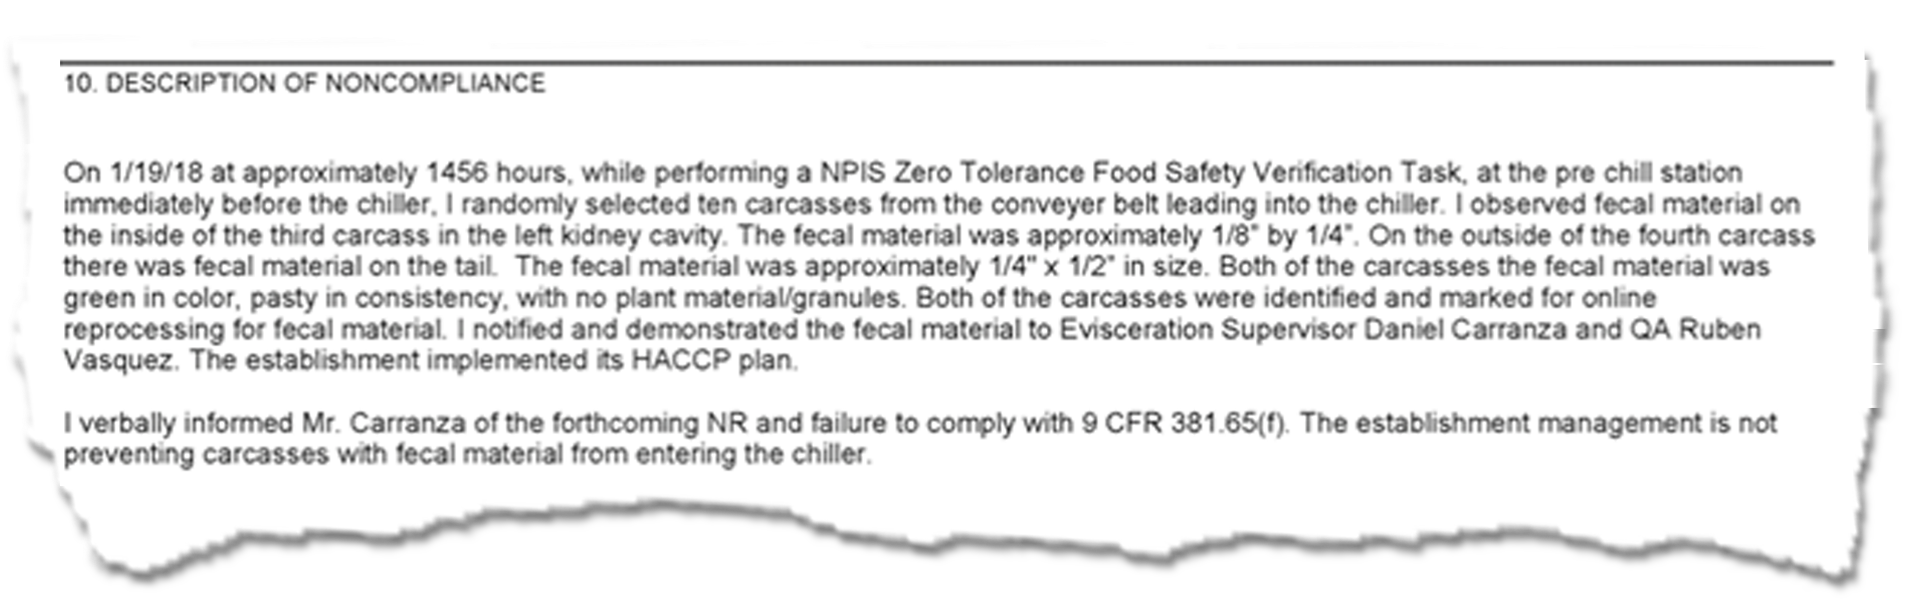 A noncompliance report description detailing the presence of fecal material in an animal carcass.